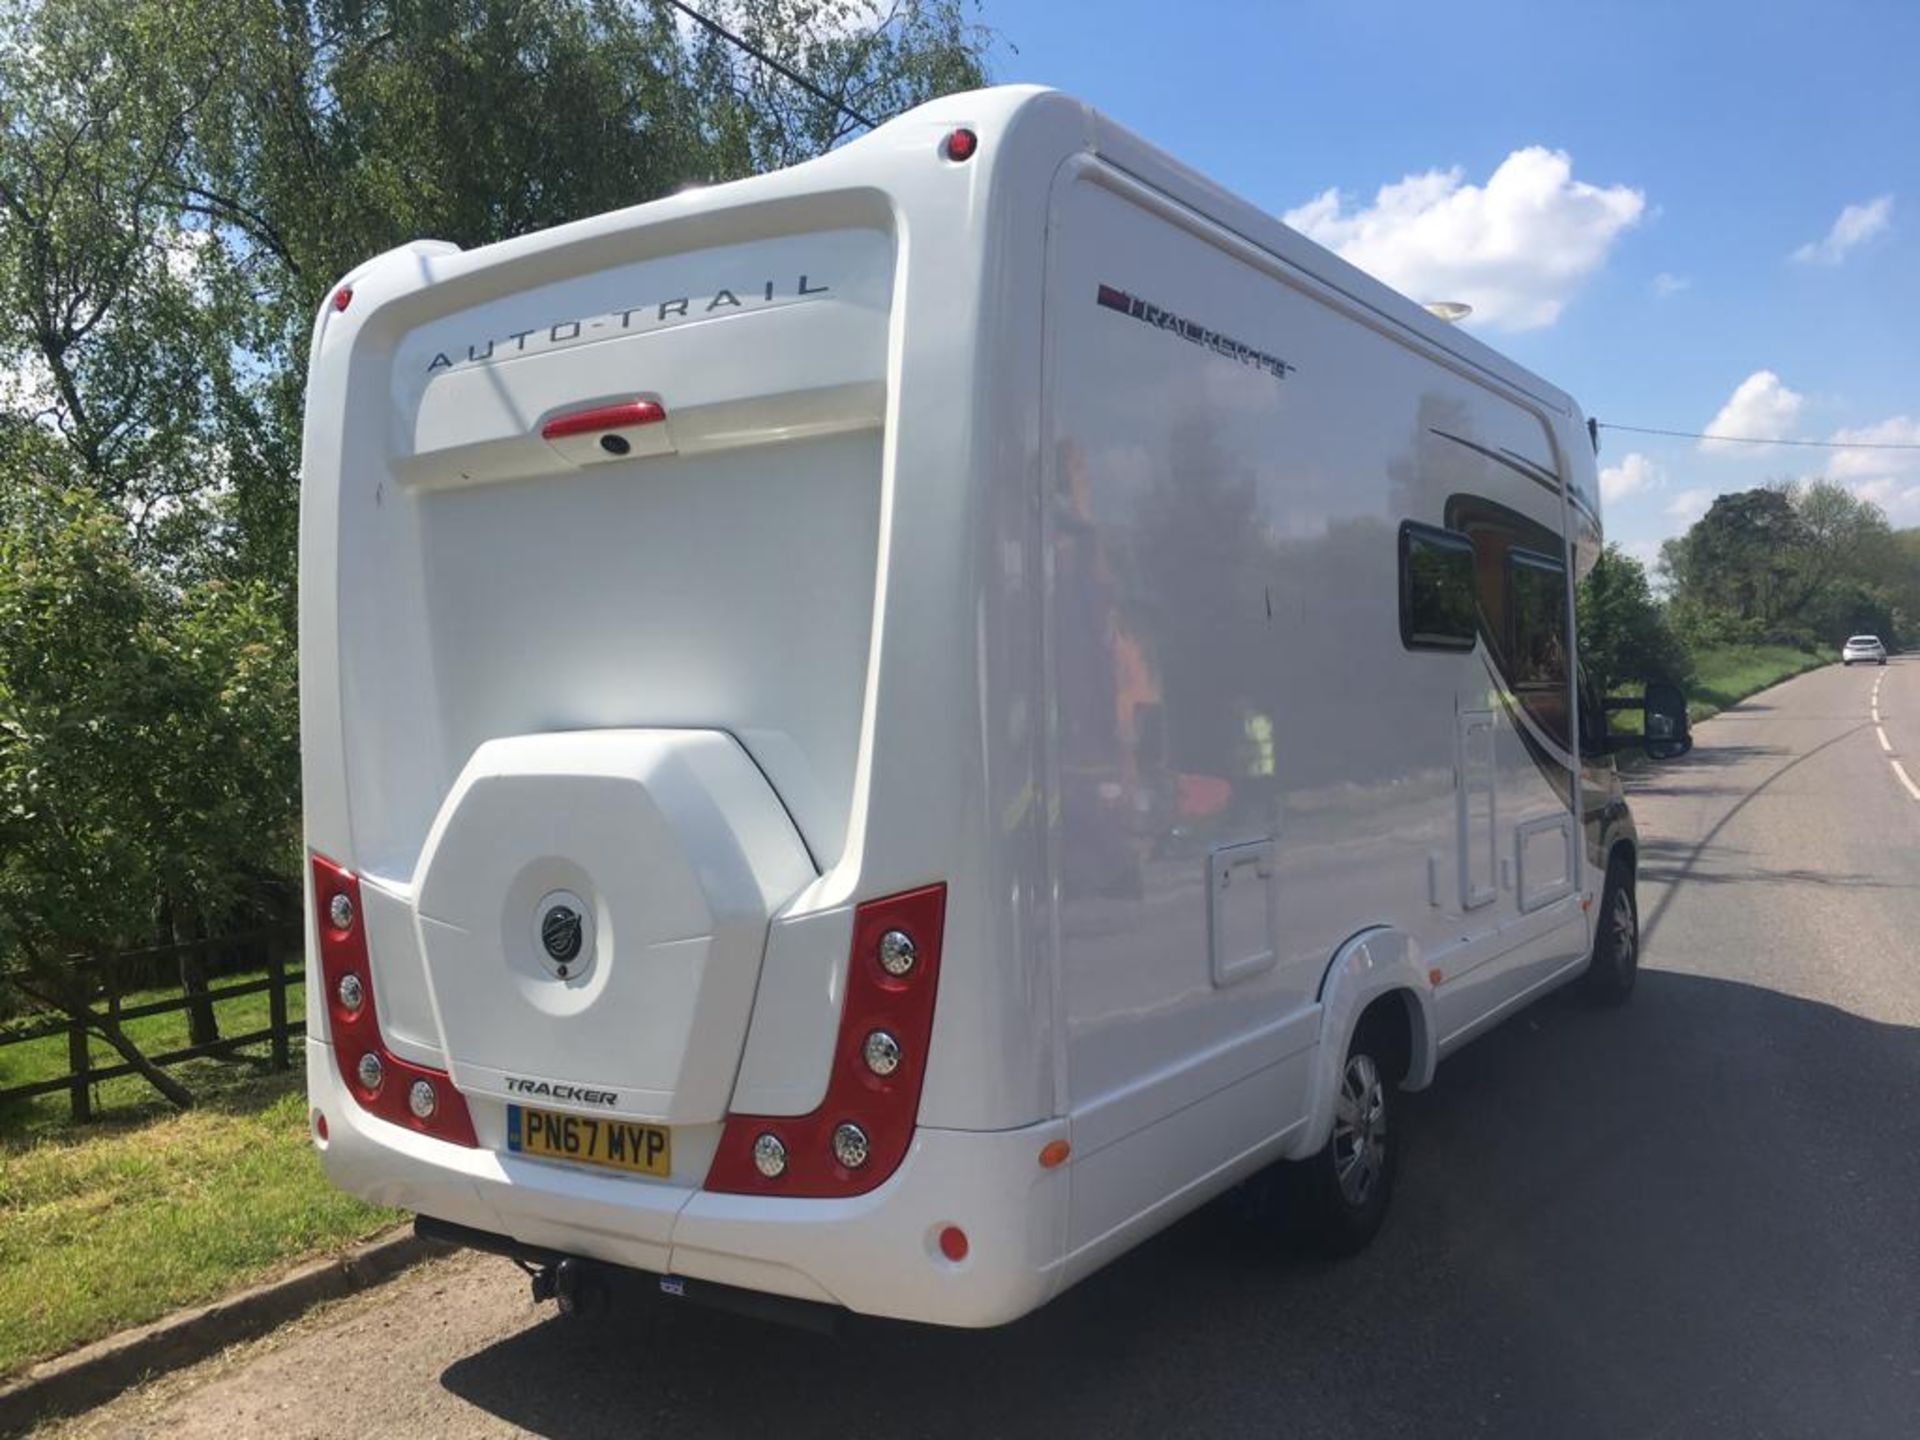 2017 FIAT AUTO TRAIL TRACKER 2.3 MULTIJET 150 MOTOR HOME **COST £67,000 LAST YEAR NEW** - Image 8 of 52